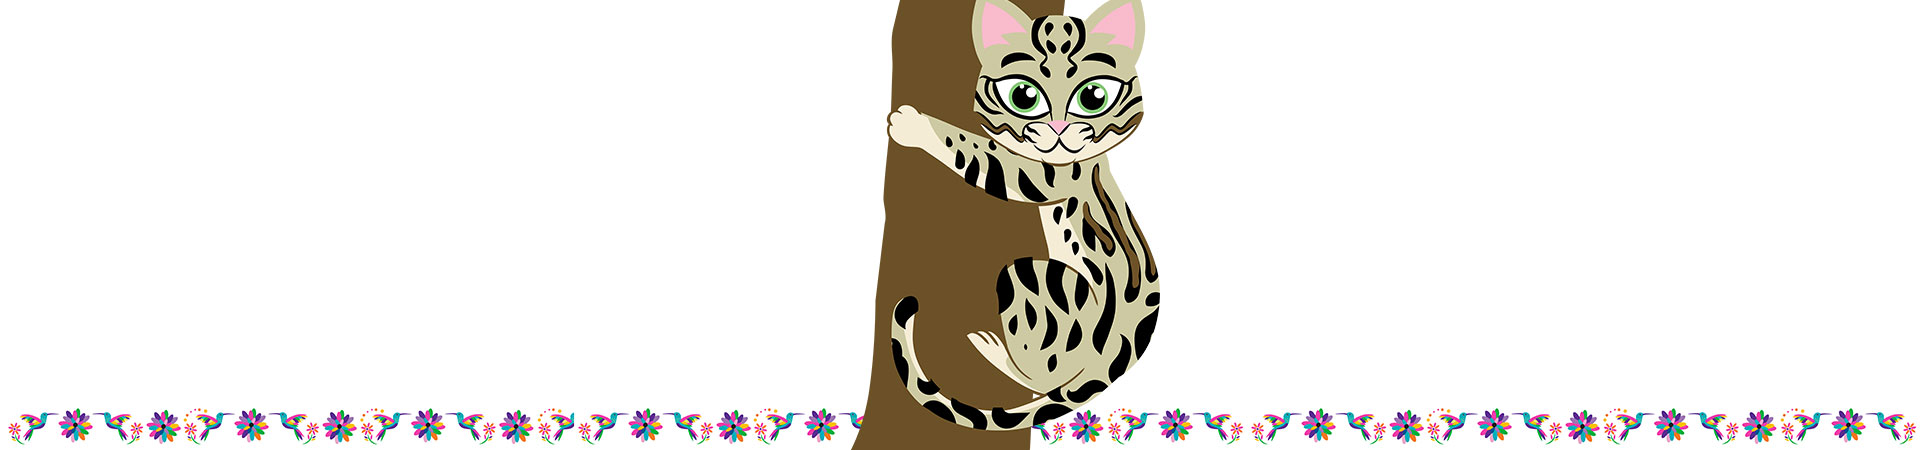  An illustration of Olive the Ocelot climbing a tree 